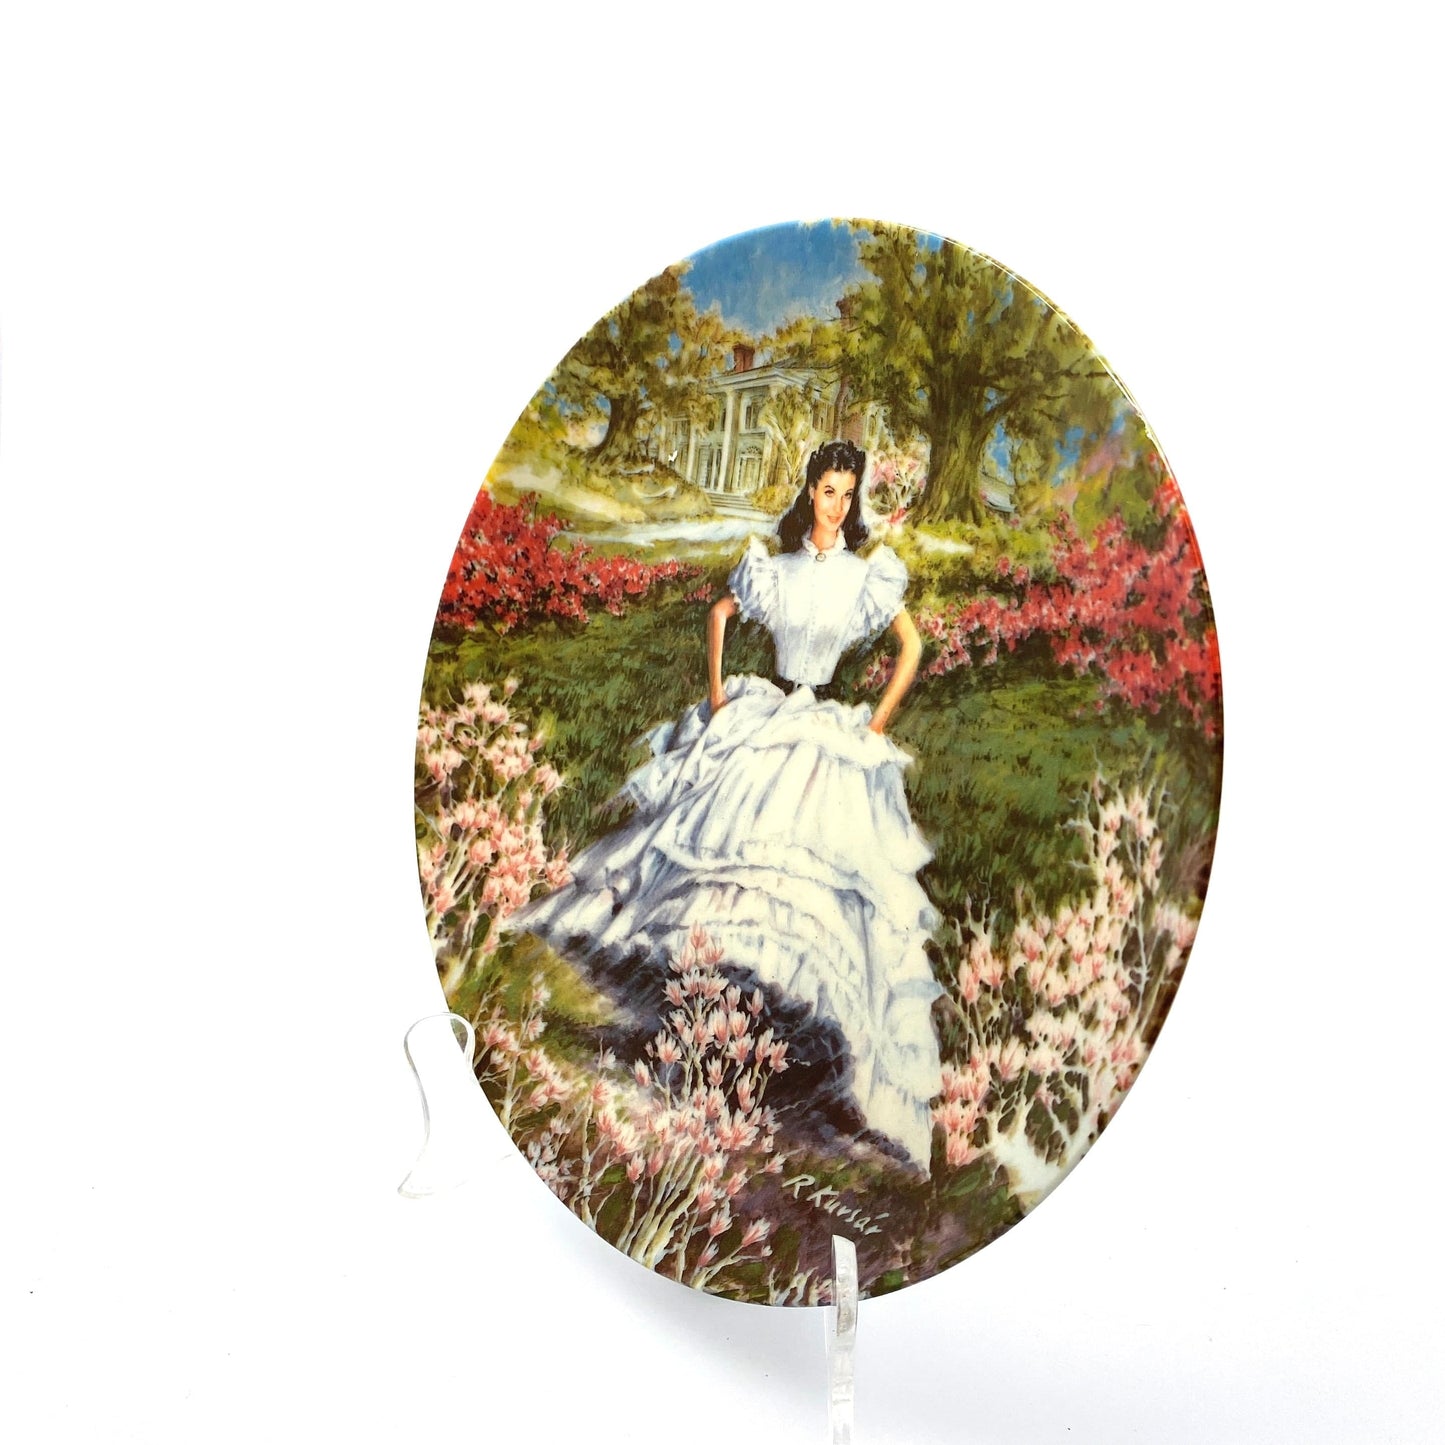 “Scarlett” MGM Gone With The Wind 1978 Collectors Plate by Raymond Kursar